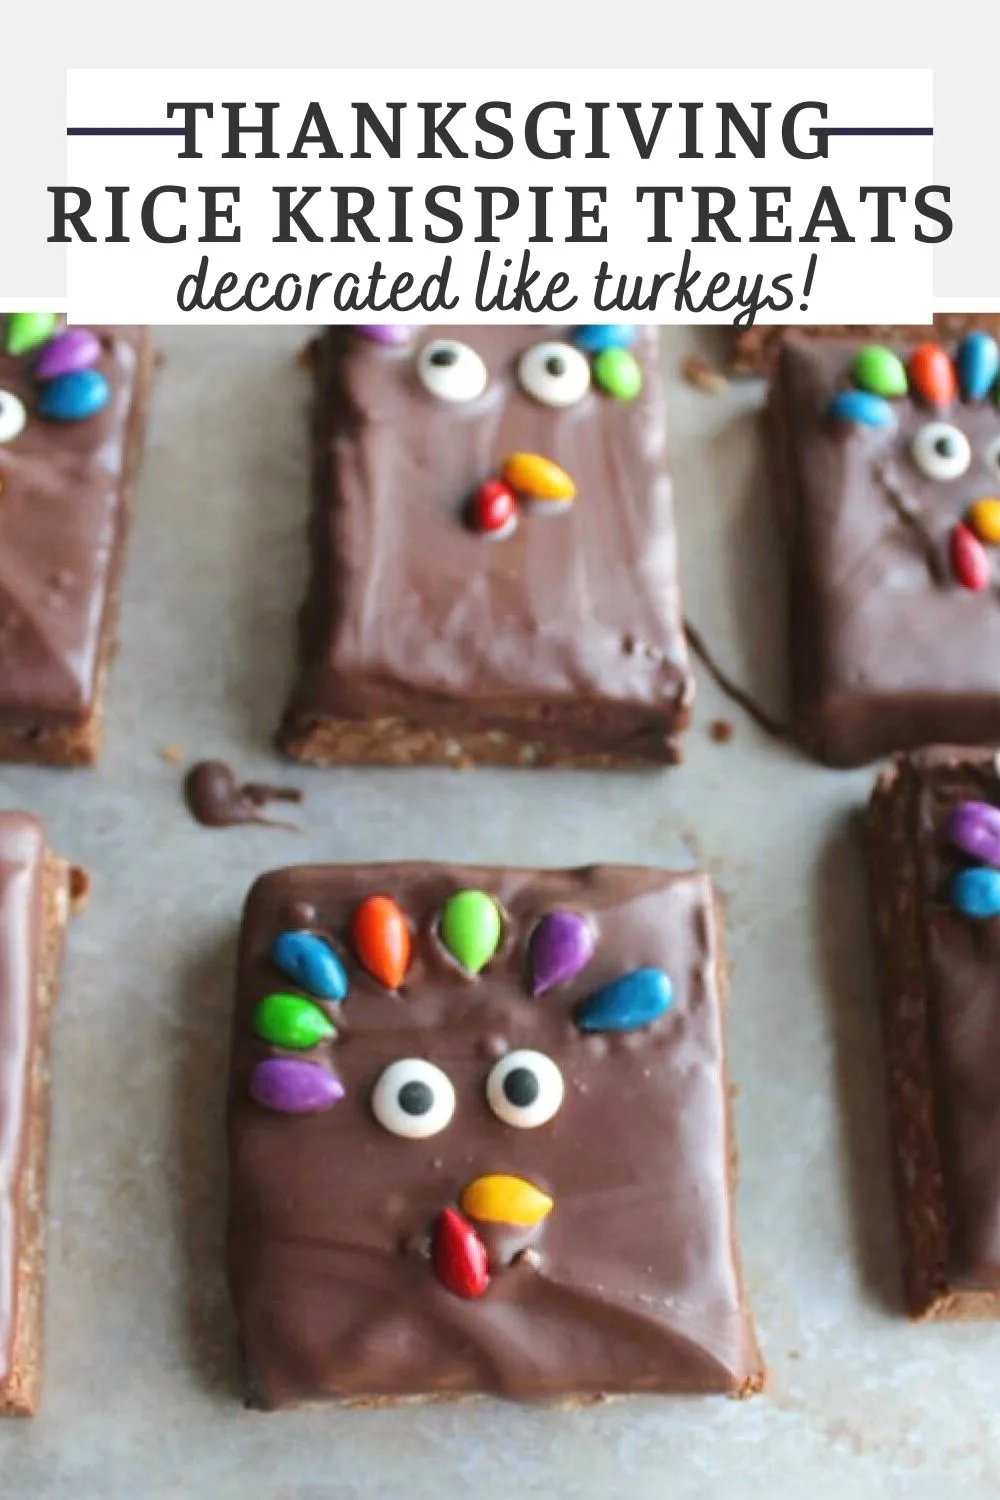 These fun and easy turkey decorated chocolate and peanut butter rice krispie treats are perfect for Thanksgiving classroom parties or your holiday dessert table. They are no bake and easy to make!